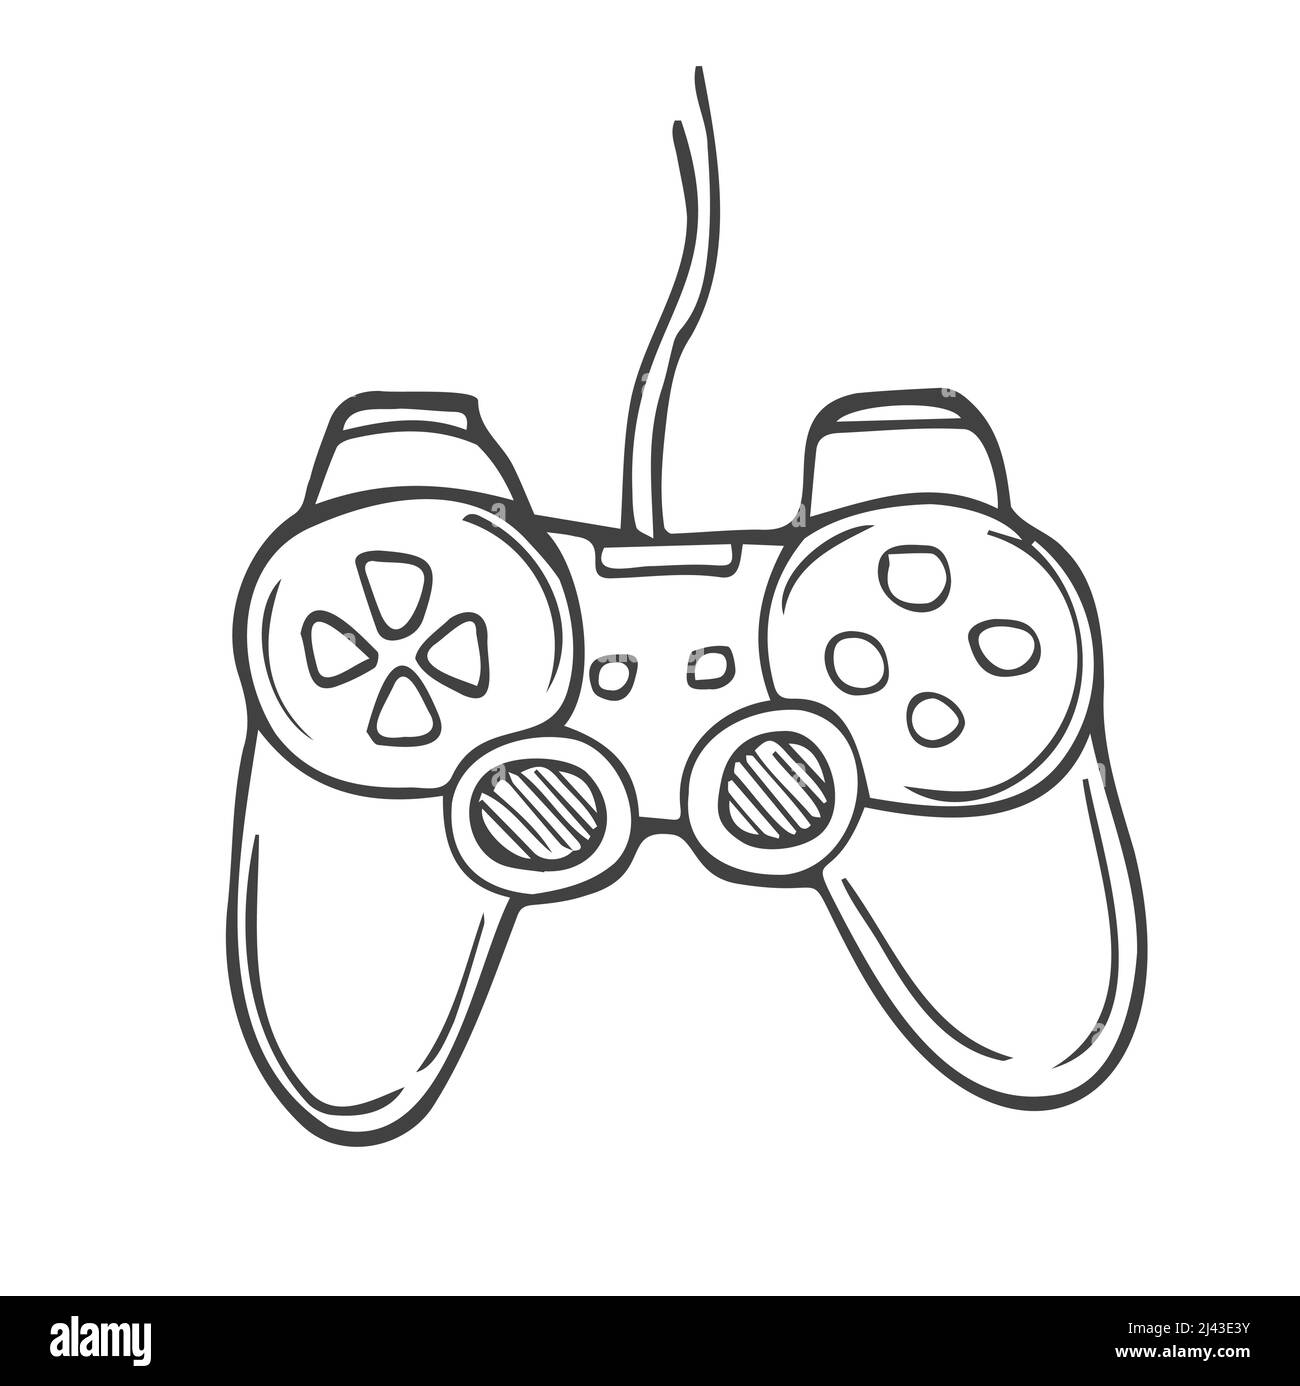 Video game controller sketch Black and White Stock Photos & Images - Alamy